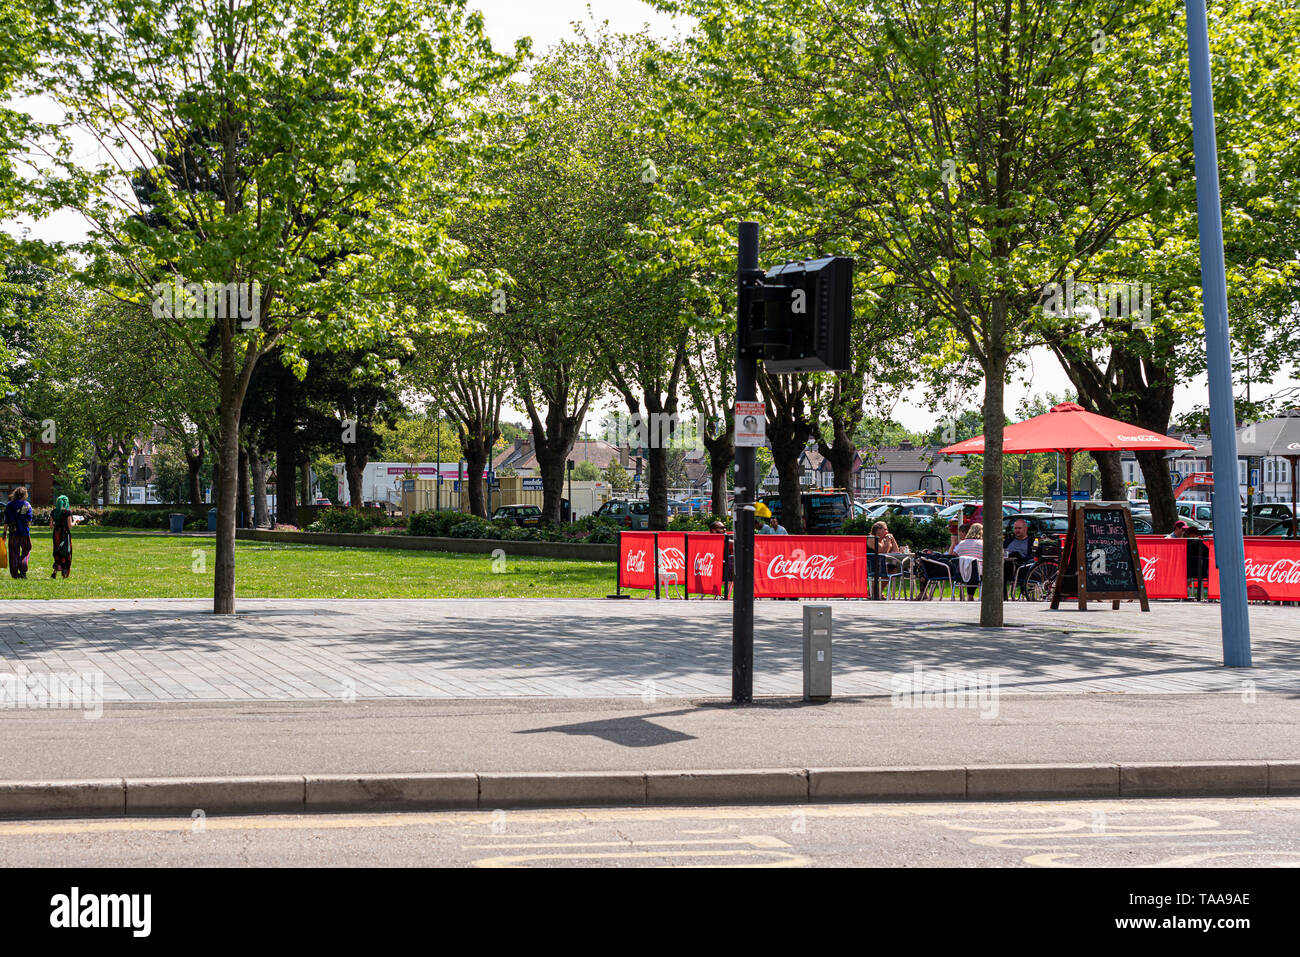 Warrior Square in Southend on Sea, Essex, UK. Green space in the town with Glasshouse Cafe, Glass House Cafe. People outside on sunny day Stock Photo